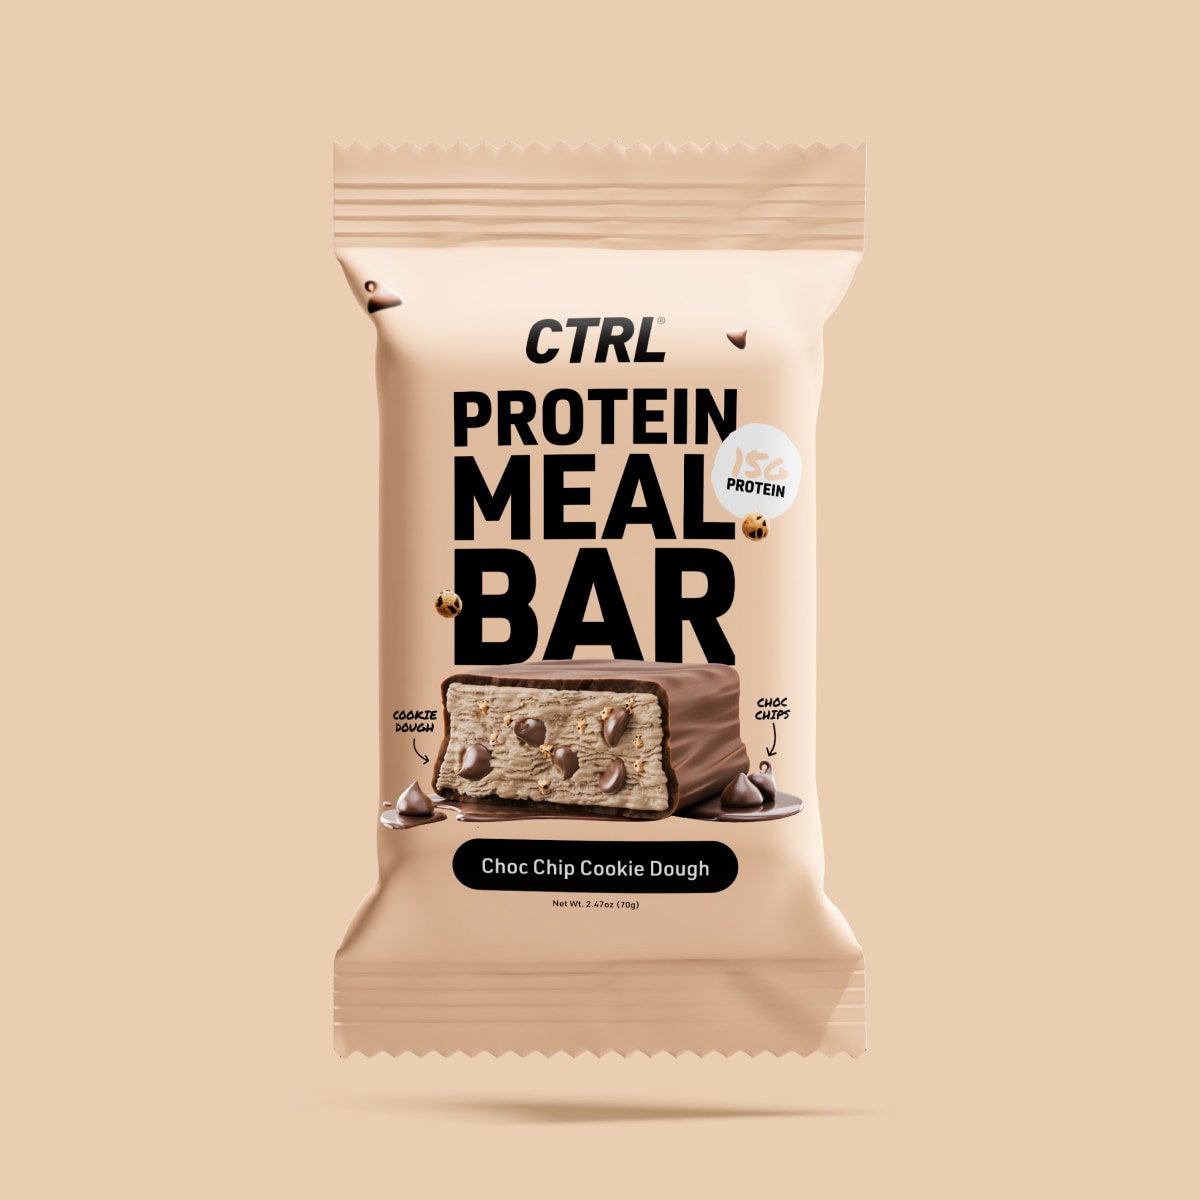 Choc Chip Cookie Dough - Protein Meal Bar (1 Bar)